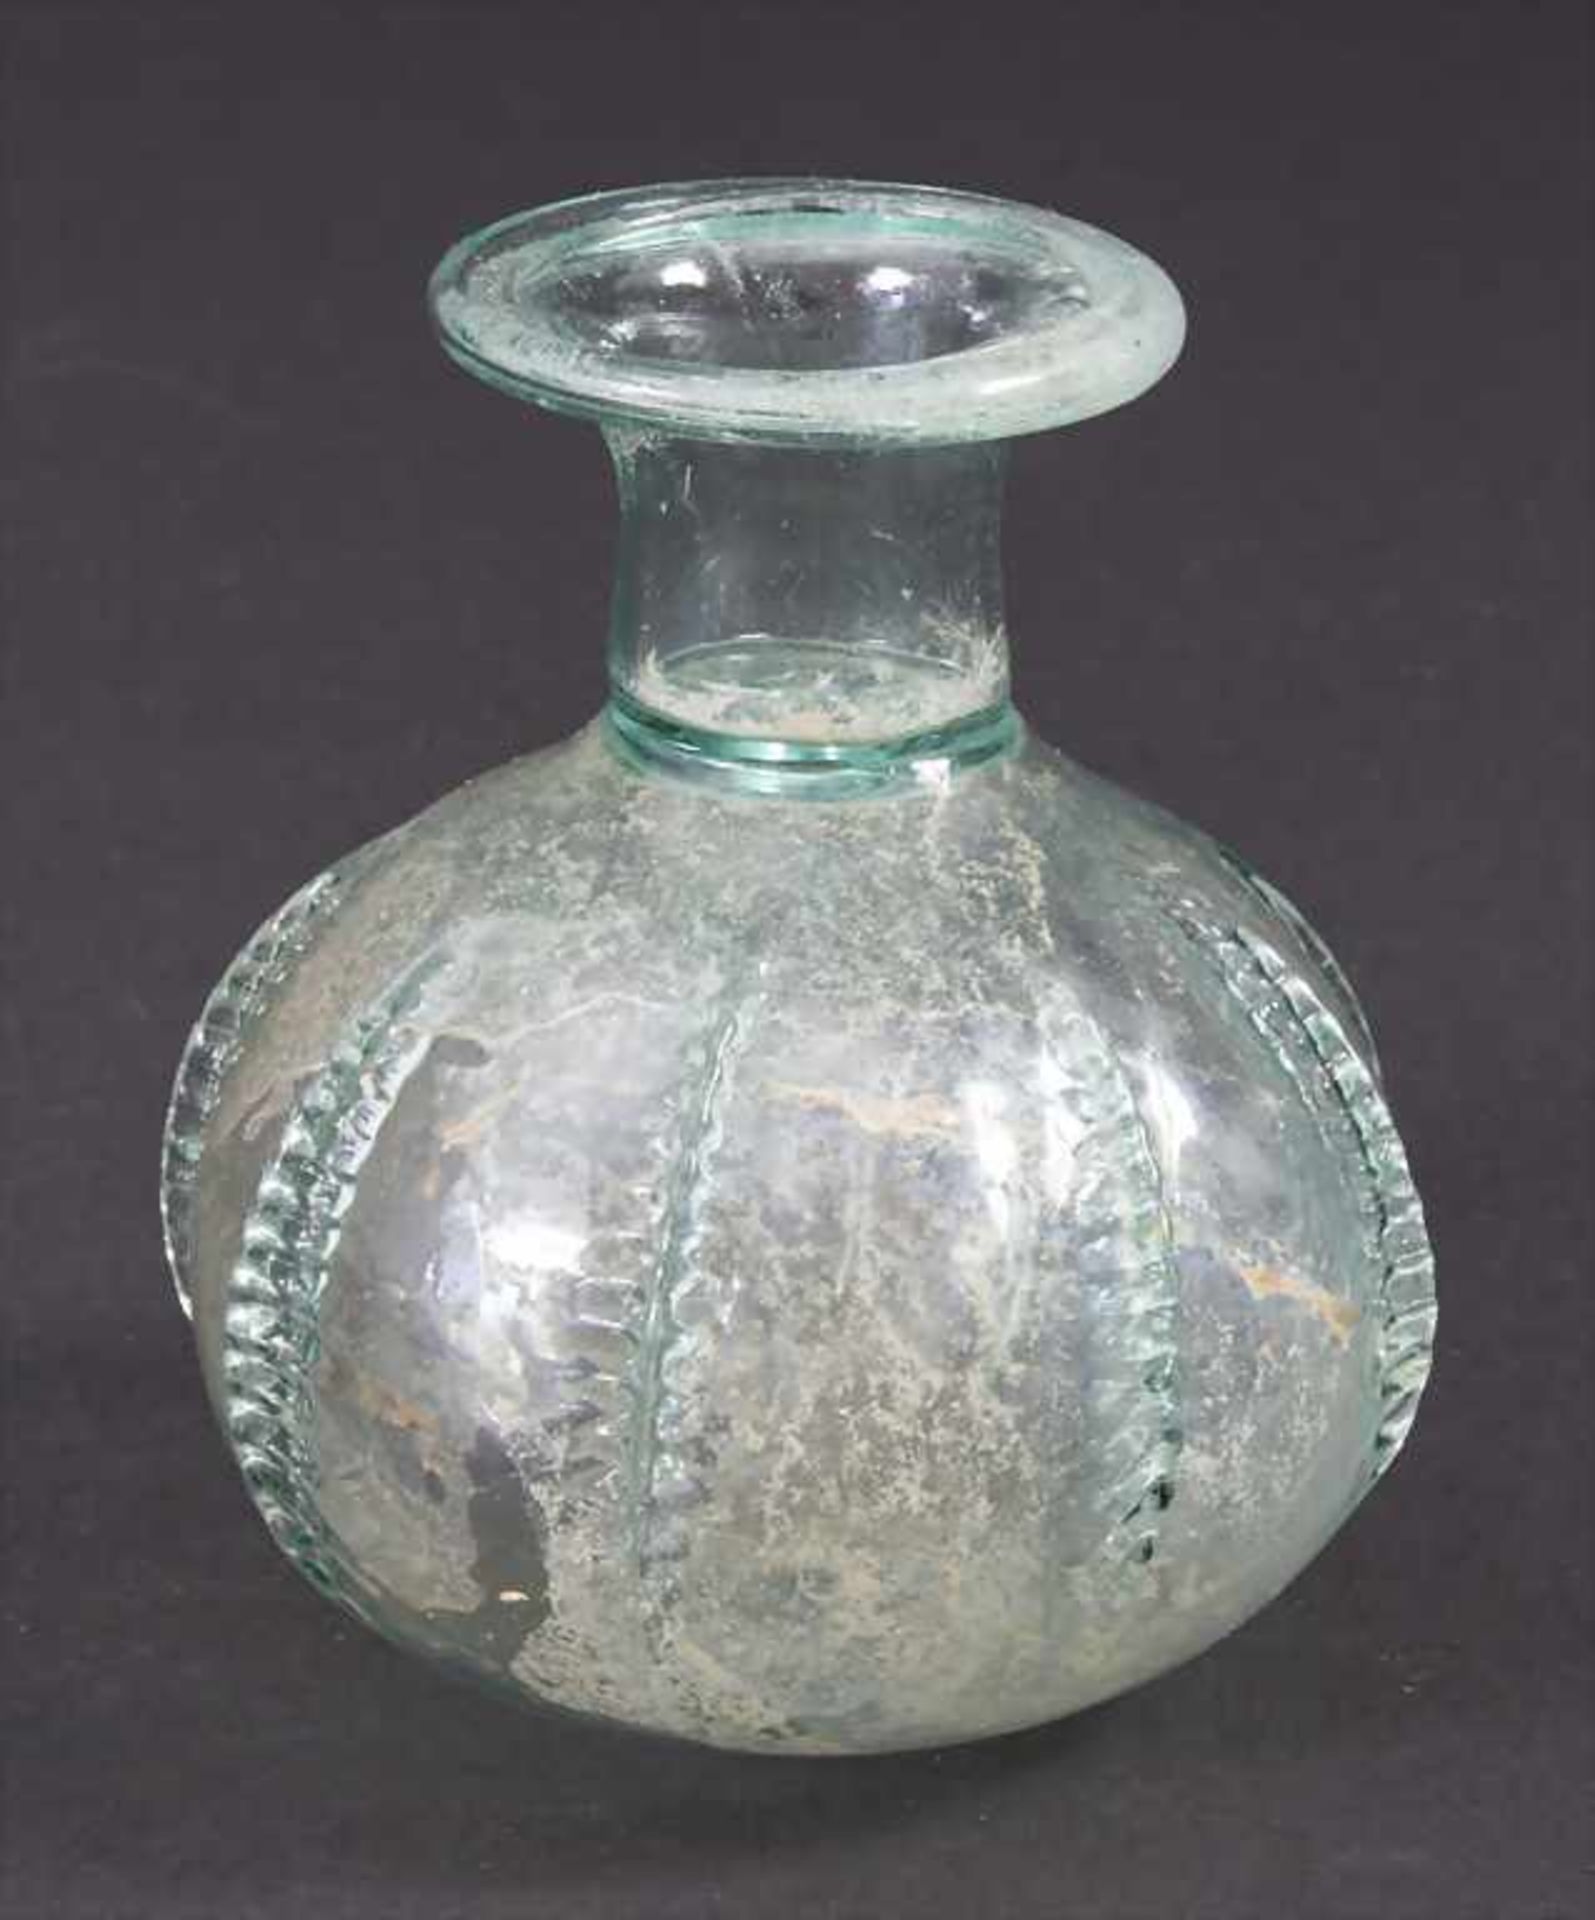 Frühes Tintenglas / An early ink bottle, süddeutsch, wohl 16./17. Jh. - Image 2 of 2